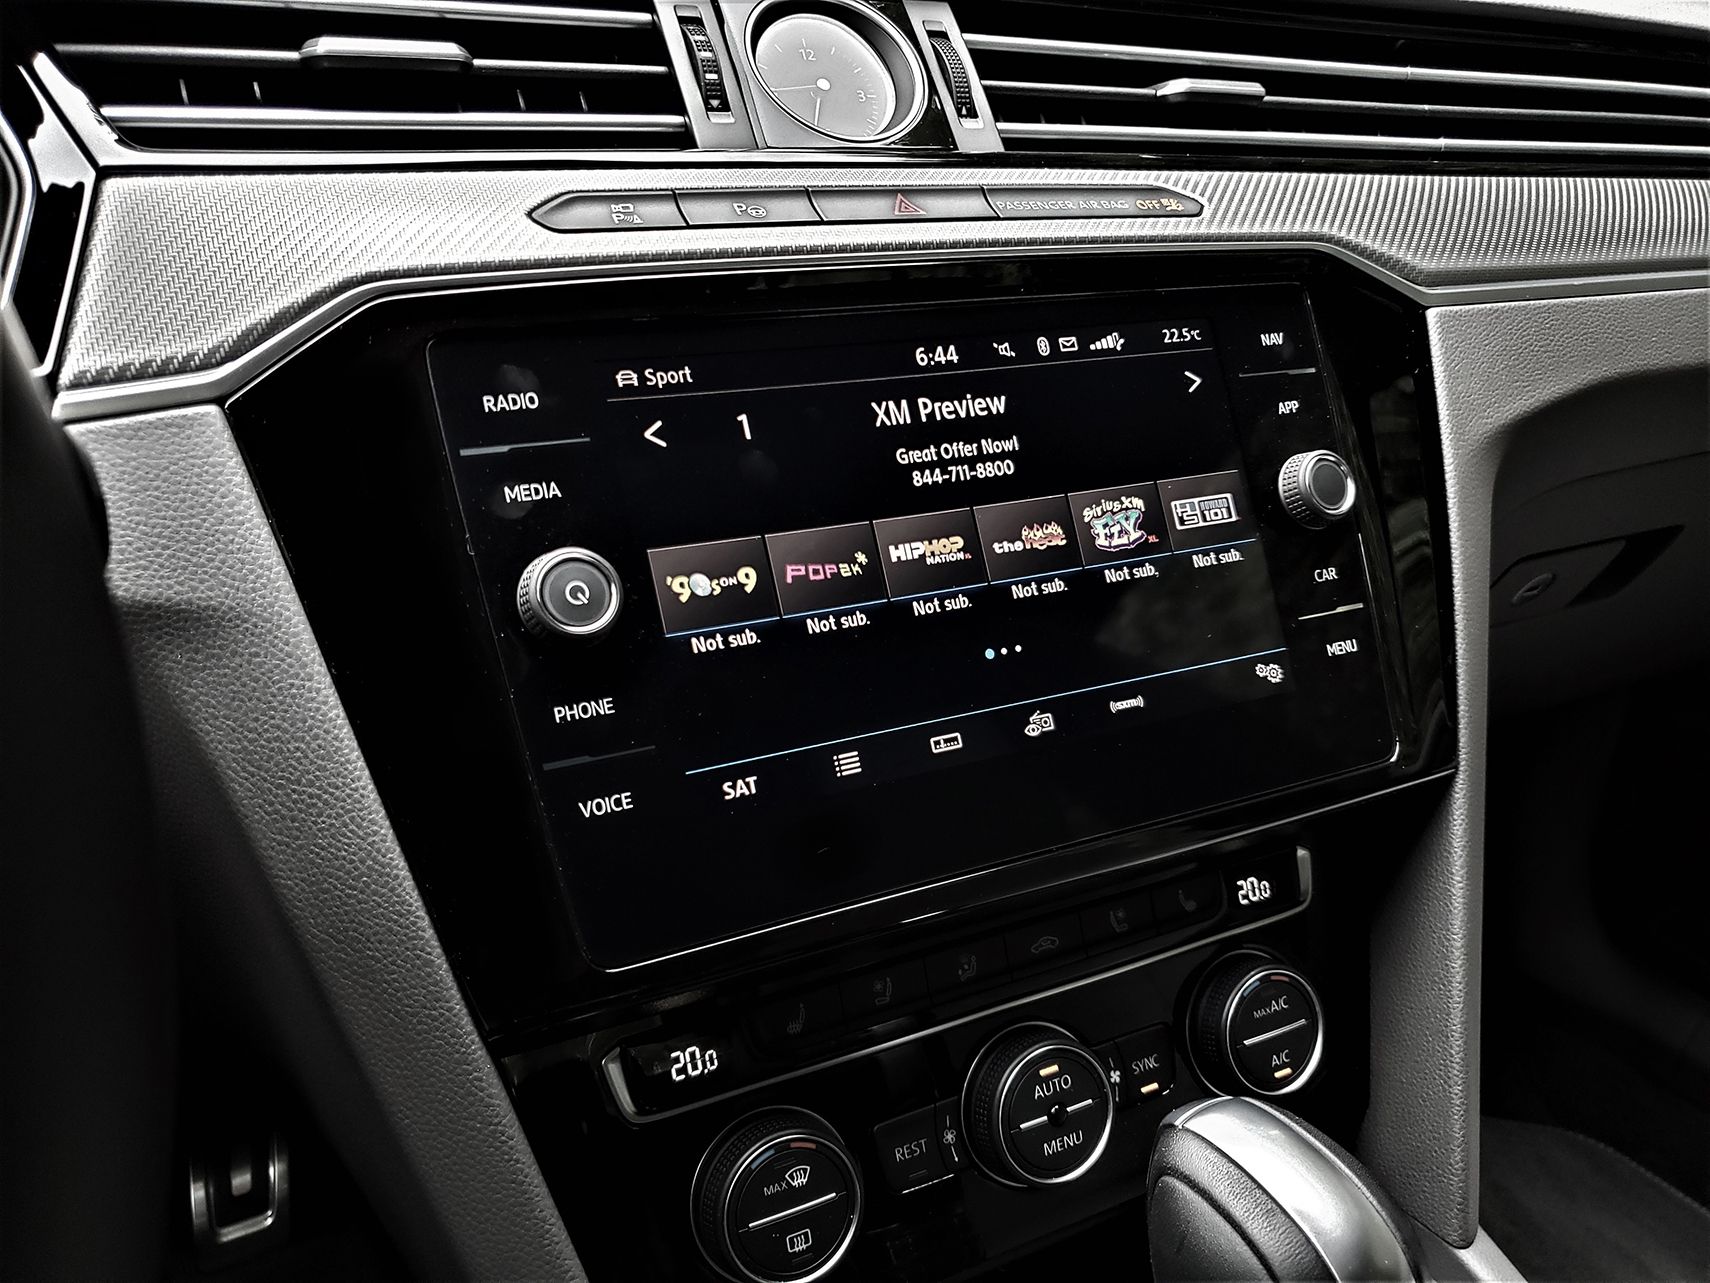 The center stack gets a superb infotainment system and high-quality switchgear.